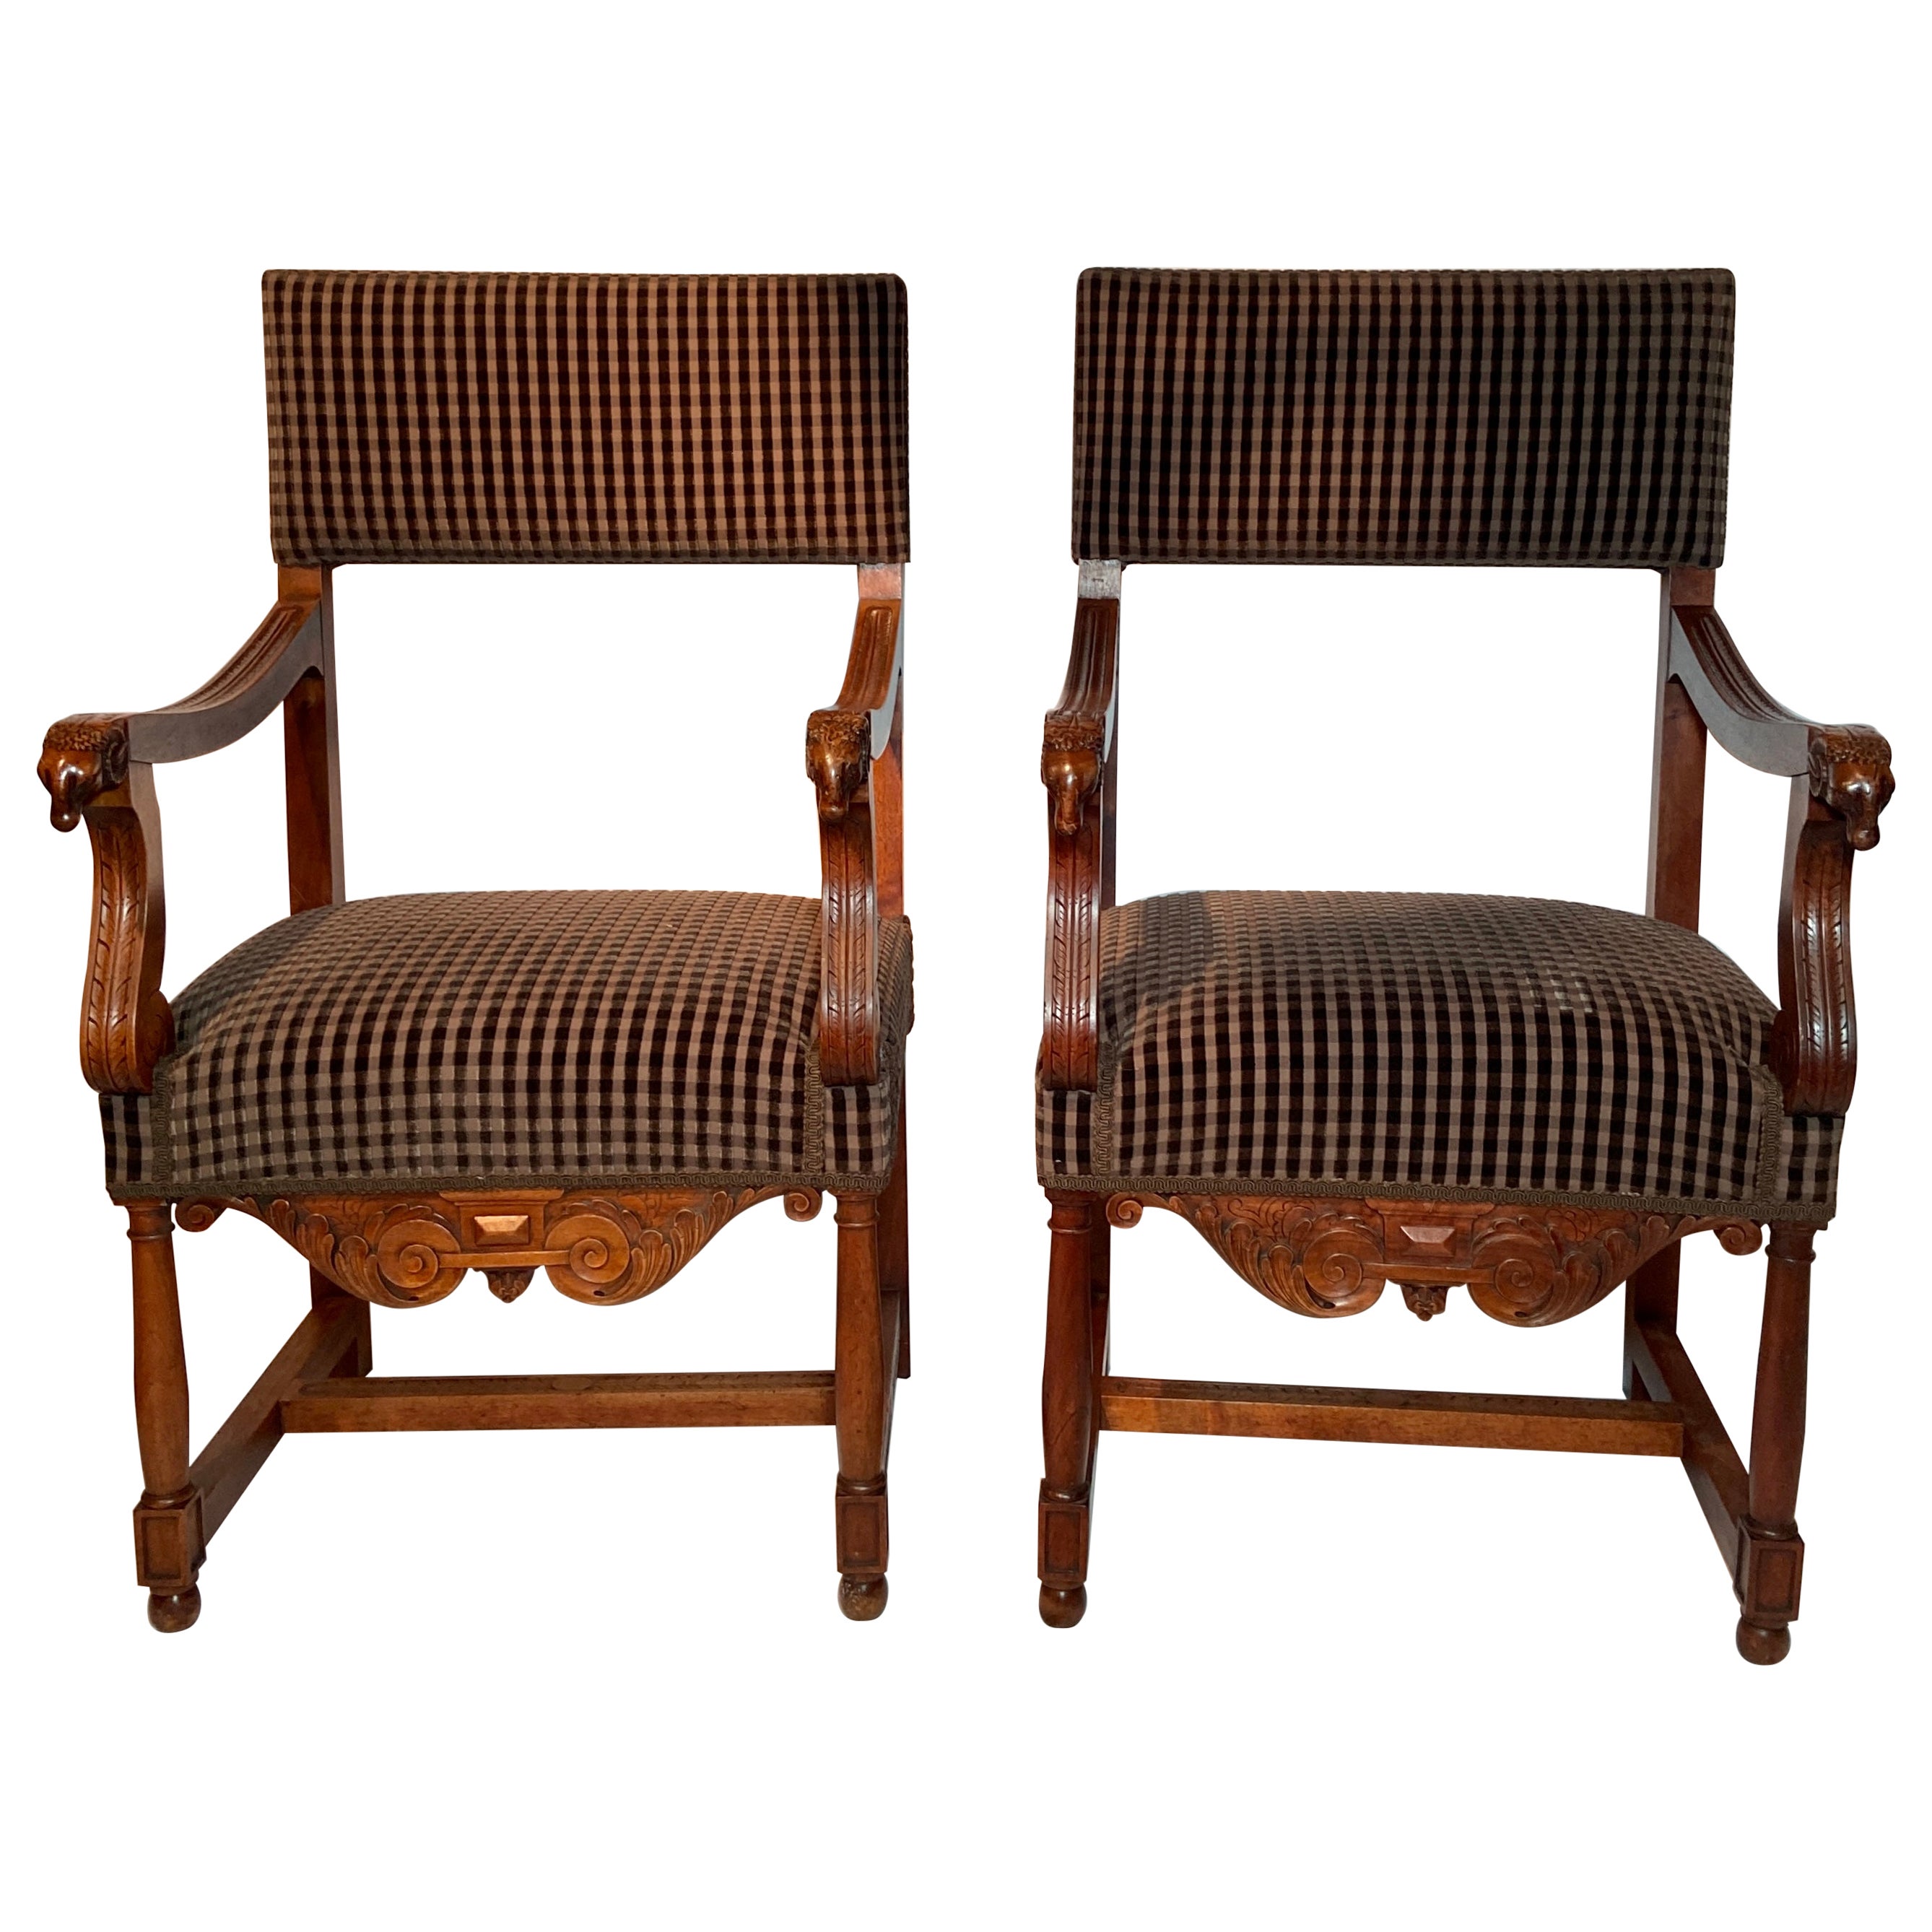 Pair Antique French Country Carved Walnut Arm Chairs, circa 1800s For Sale